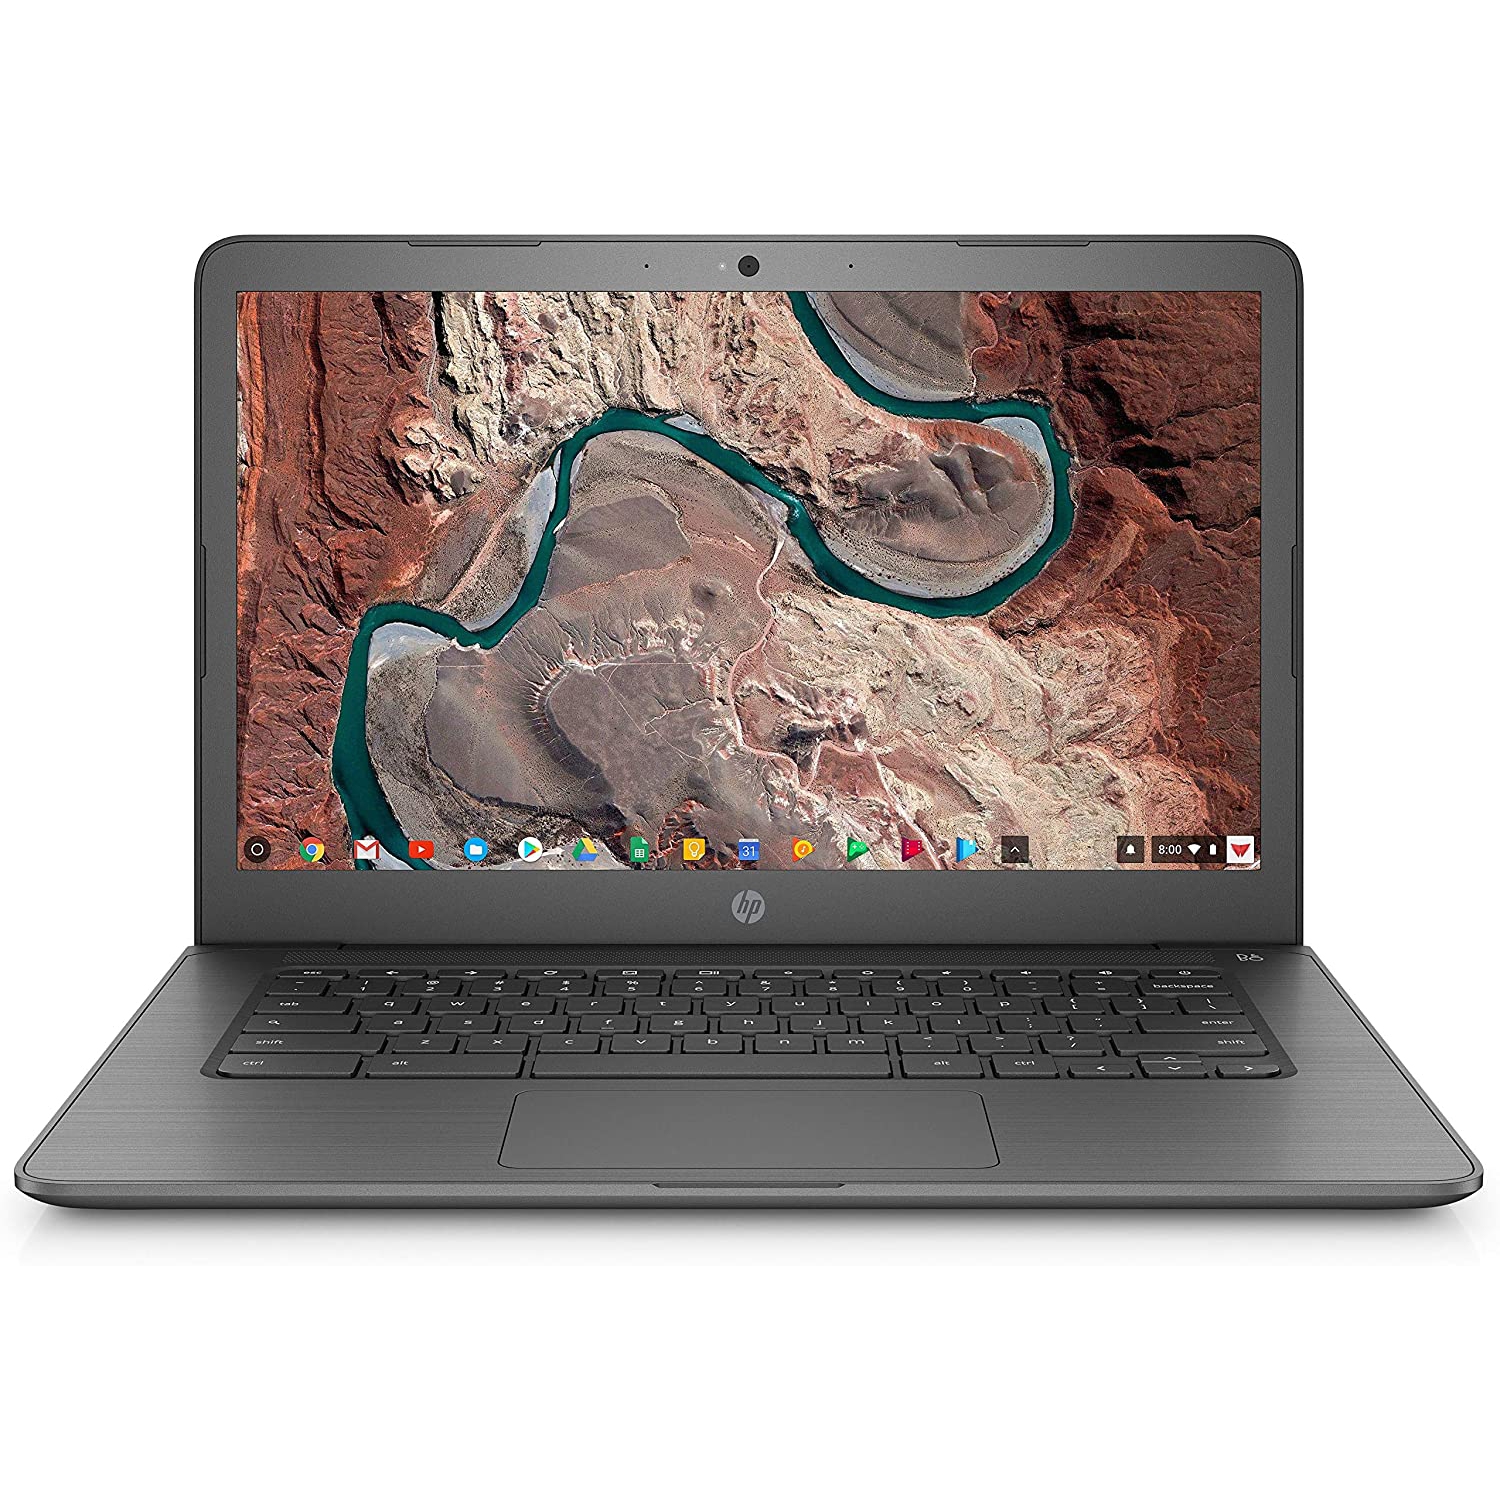 HP 14" Chromebook Laptop Intel Dual Core N3350 32GB 4GB Chrome OS GRAY Refurbished Excellent